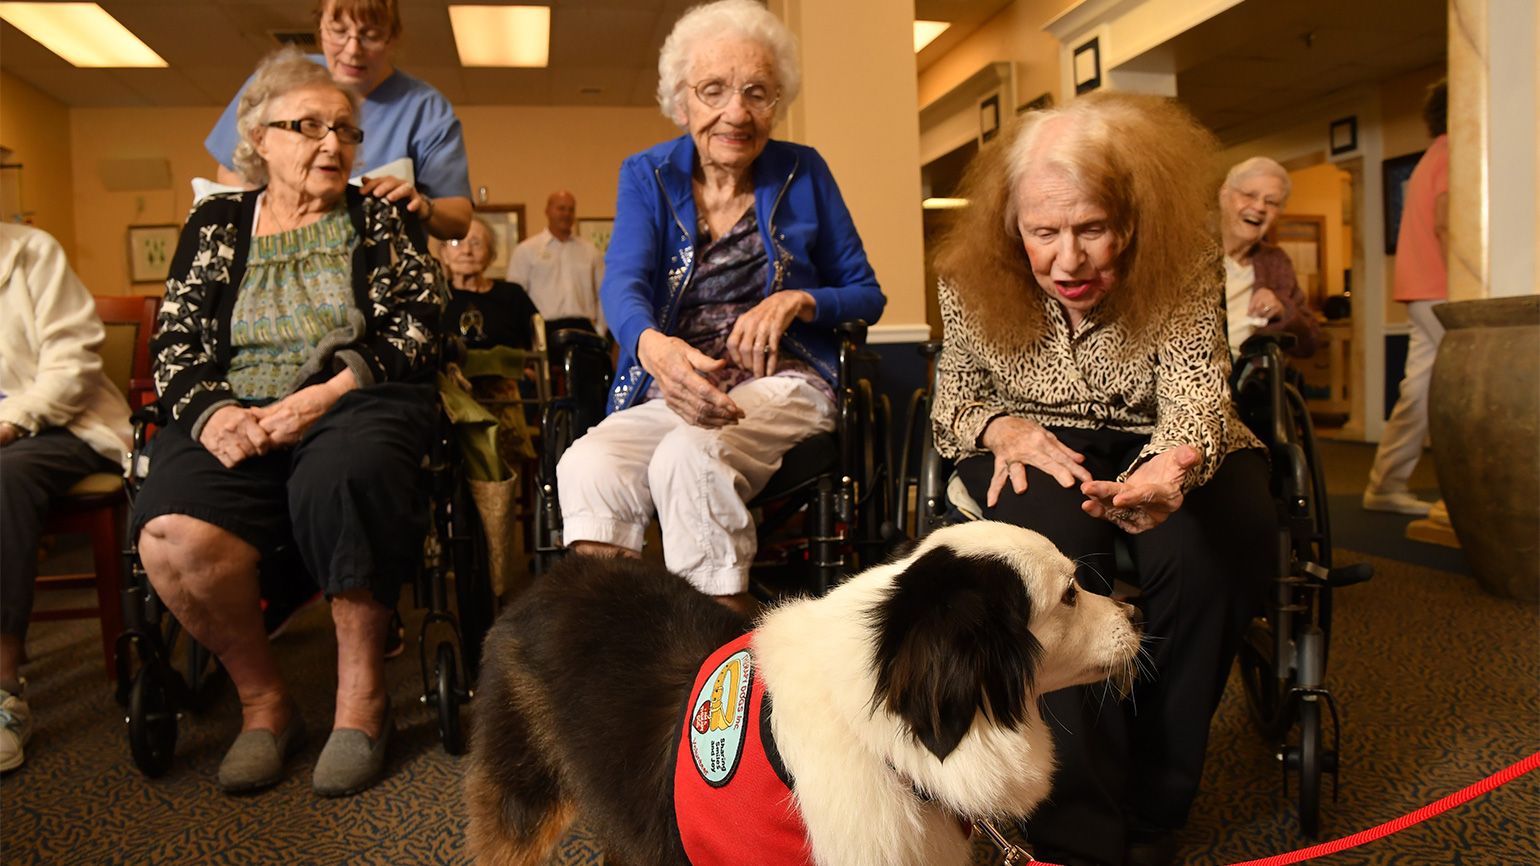 Residents light up when they see Jack coming. His daily visits are definitely a highlight for them.